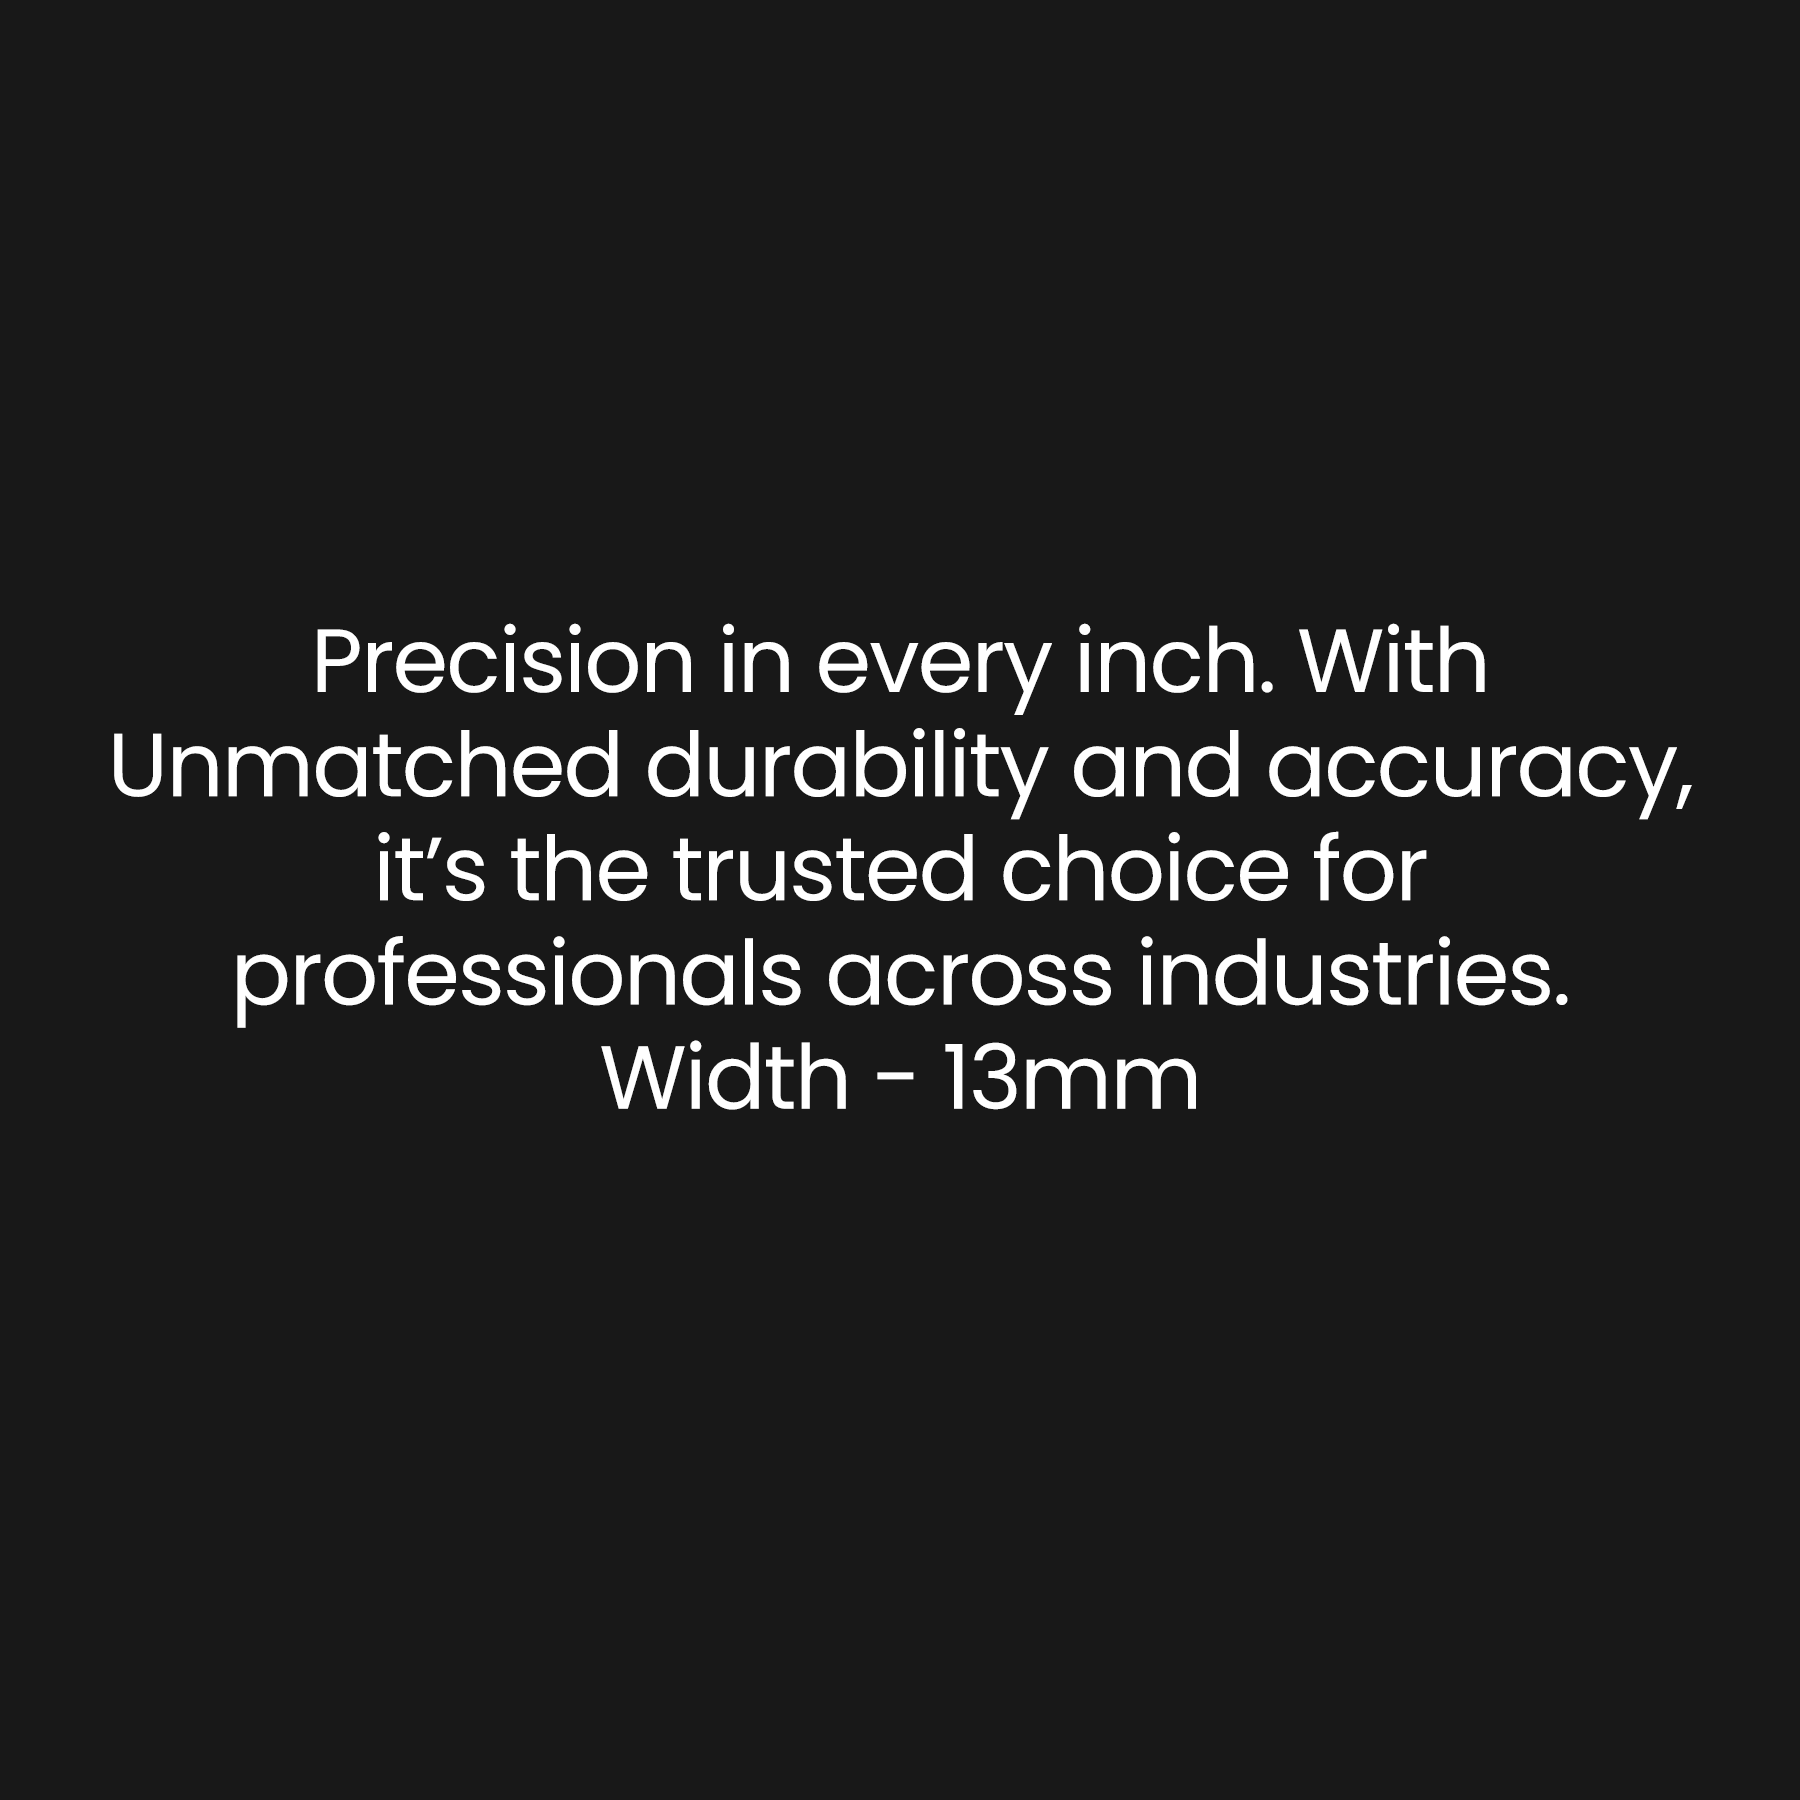 Prescision in every inch. With Unmatched durability and accuracy, It's the trusted choice for professionals accorss industries. Width - 13mm